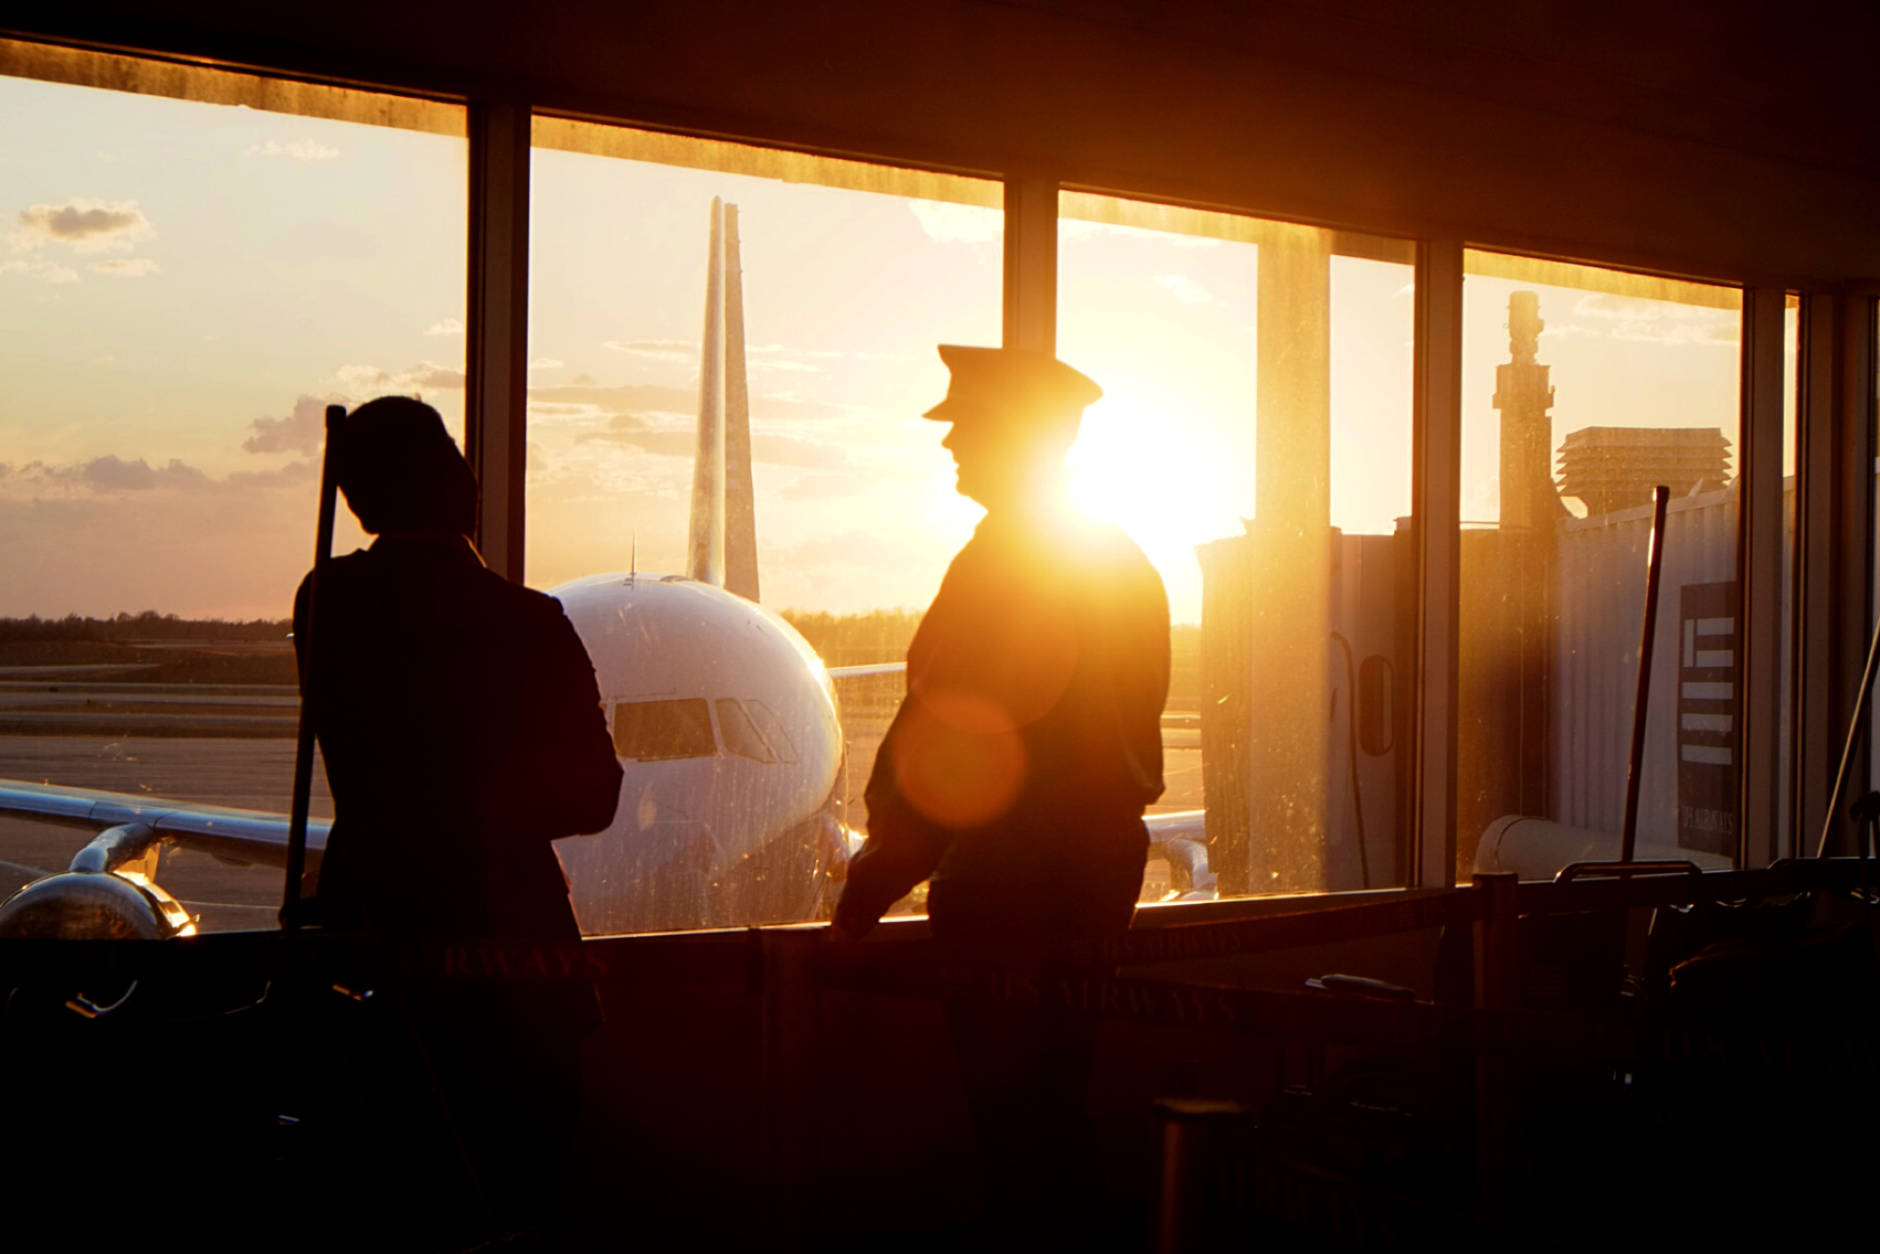 An airline pilot talks with a crew member between flights as the sun sets at the Charlotte Douglas International Airport in Charlotte, N.C., Friday Jan. 18, 2014. (AP Photo/J. David Ake)